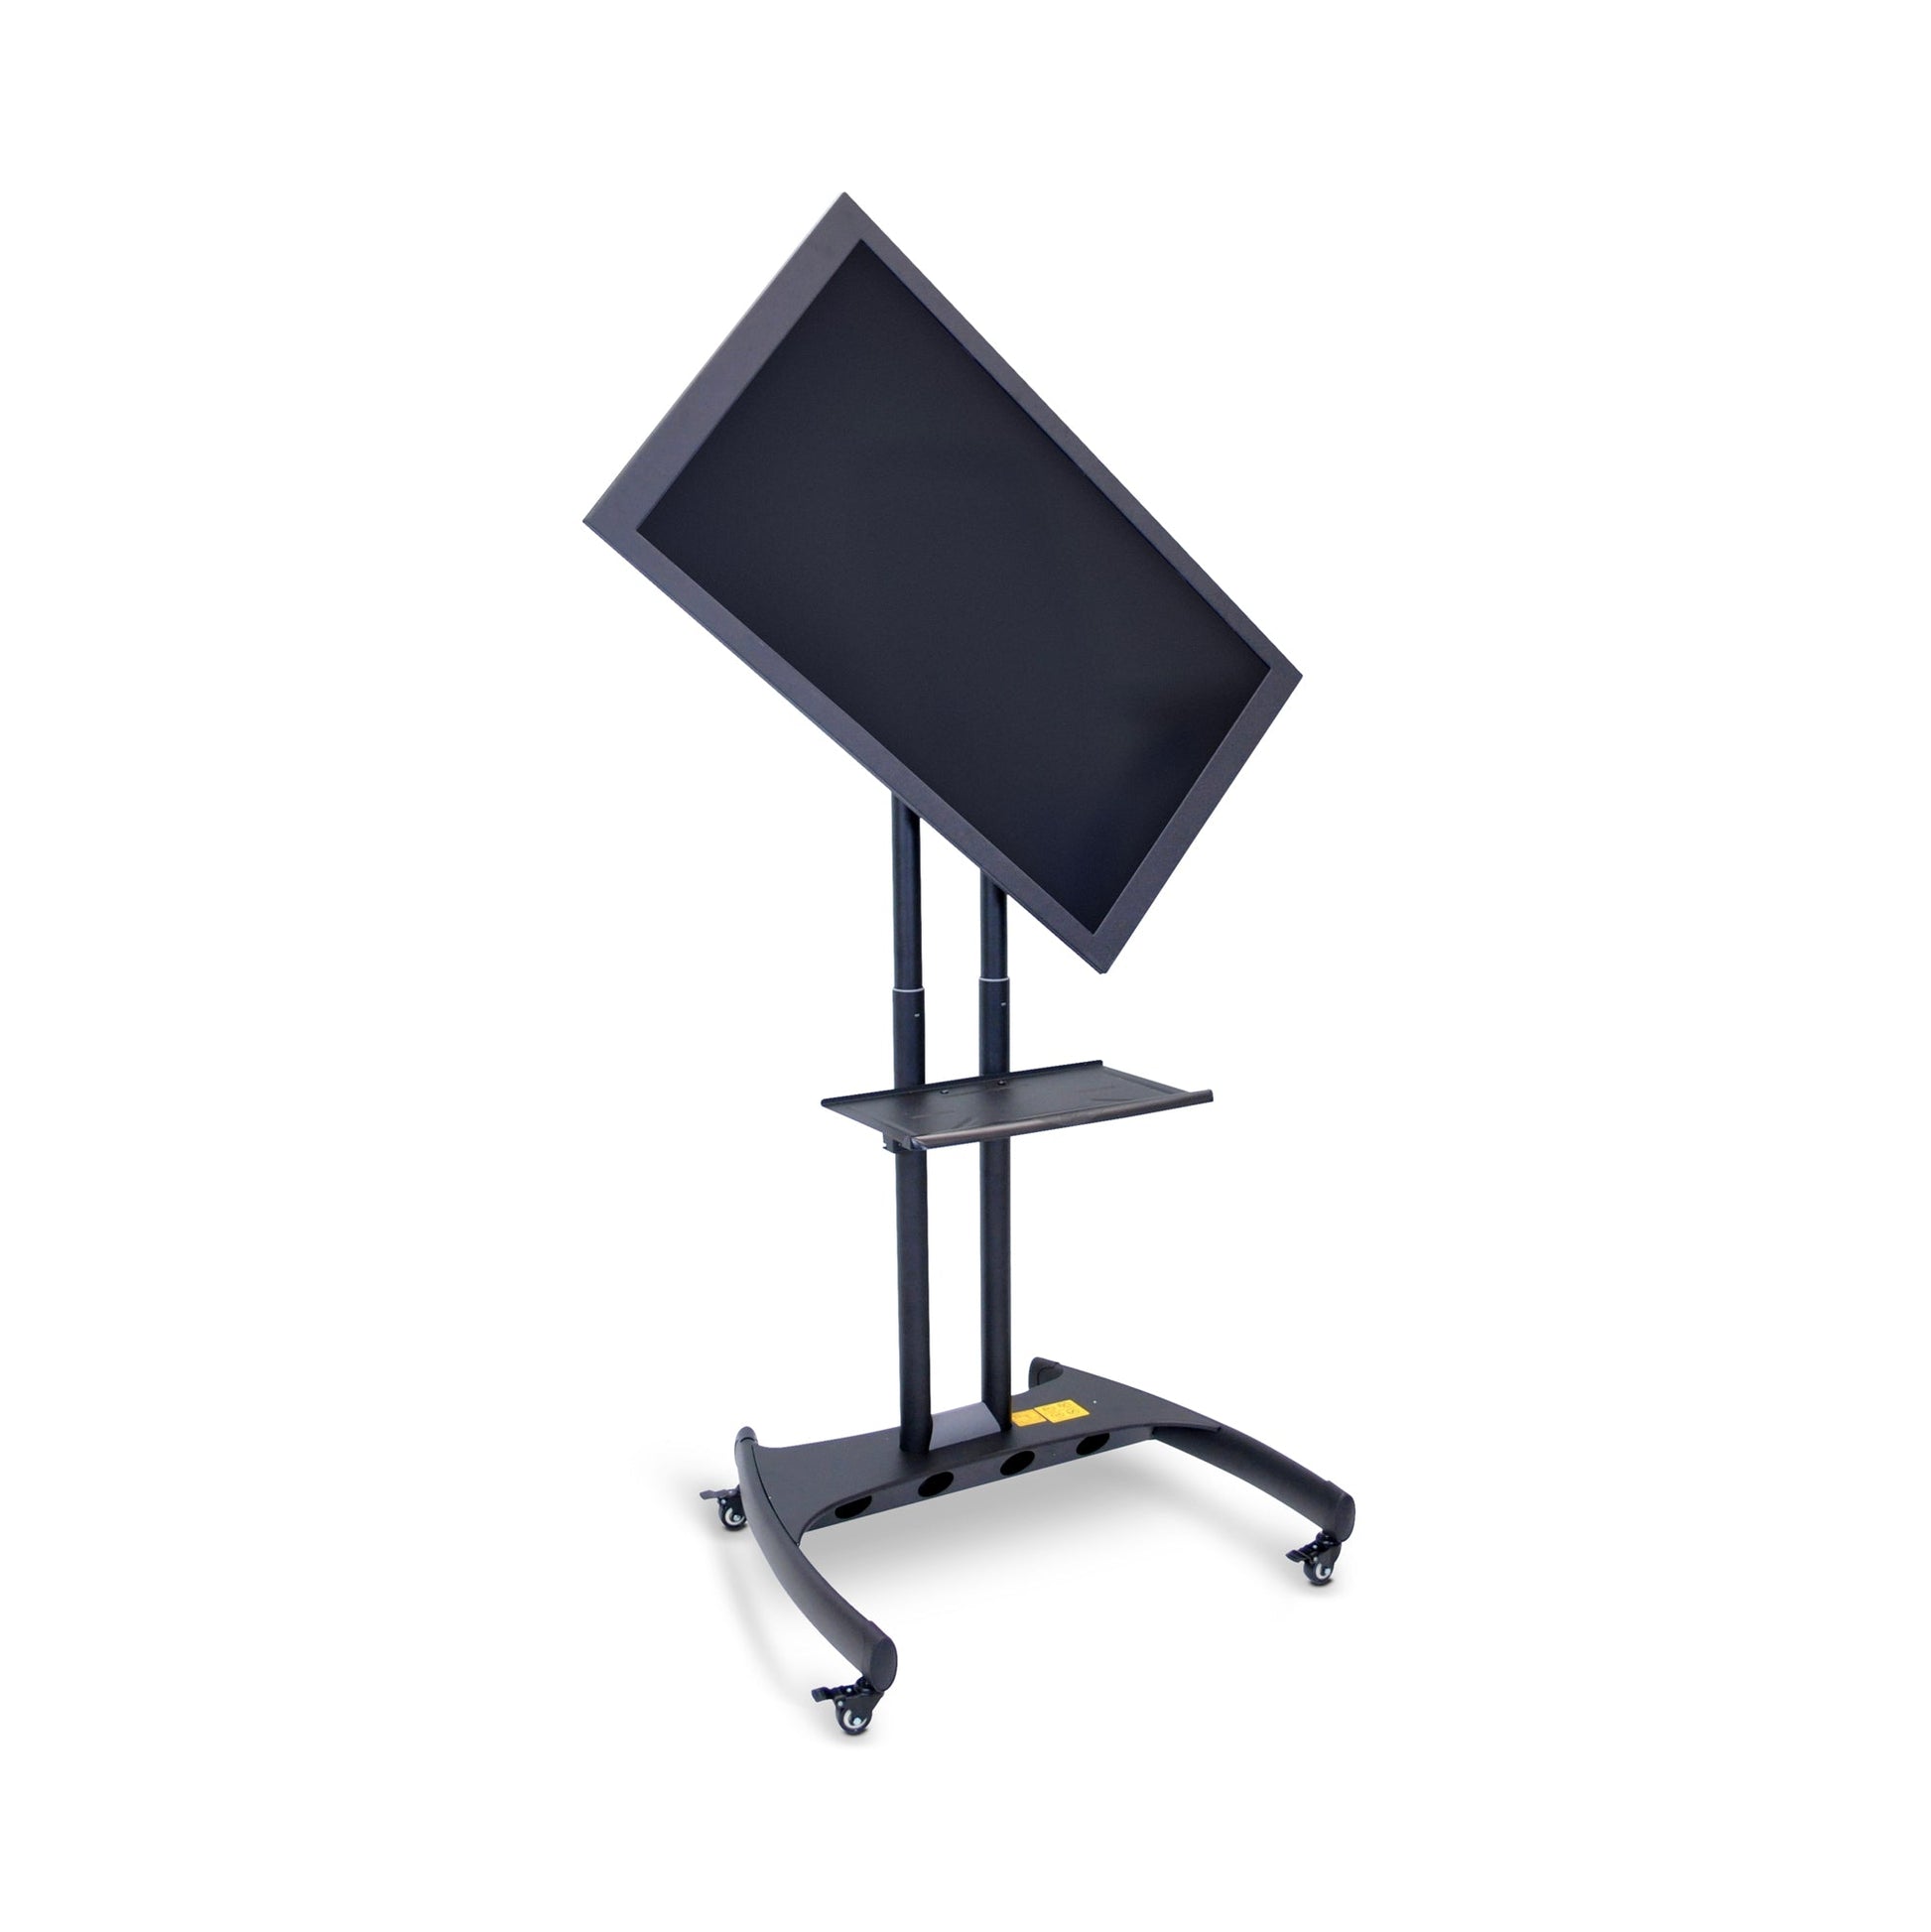 Luxor FP3500 Series Adjustable Flat Panel Cart And Mount - 32" - 60" Height (Luxor LUX-FP3500) - SchoolOutlet